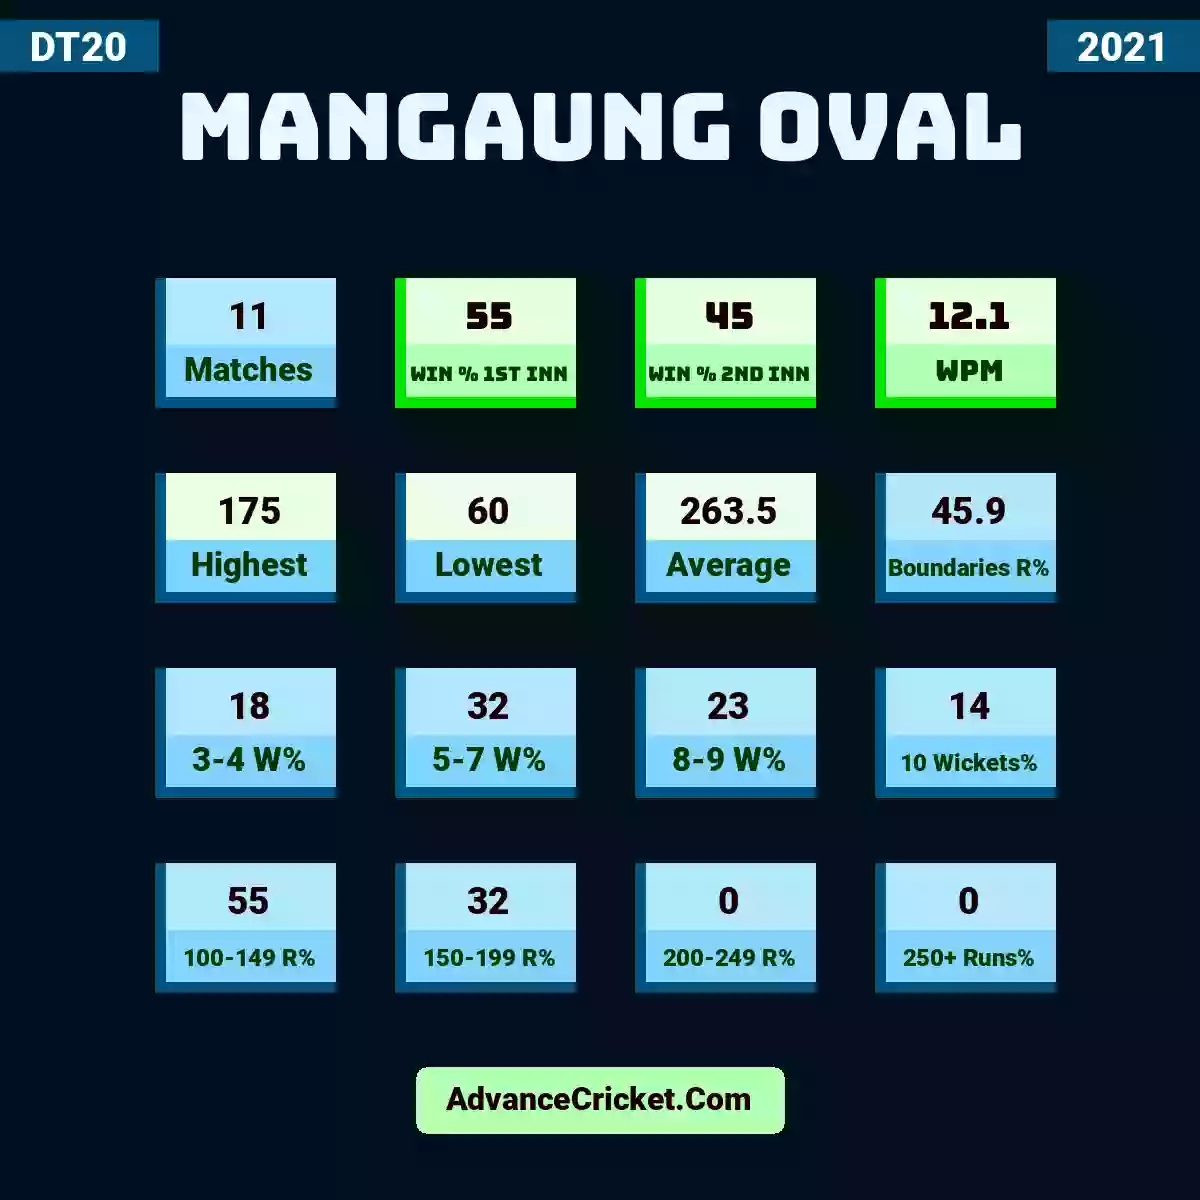 Image showing Mangaung Oval with Matches: 11, Win % 1st Inn: 55, Win % 2nd Inn: 45, WPM: 12.1, Highest: 175, Lowest: 60, Average: 263.5, Boundaries R%: 45.9, 3-4 W%: 18, 5-7 W%: 32, 8-9 W%: 23, 10 Wickets%: 14, 100-149 R%: 55, 150-199 R%: 32, 200-249 R%: 0, 250+ Runs%: 0.